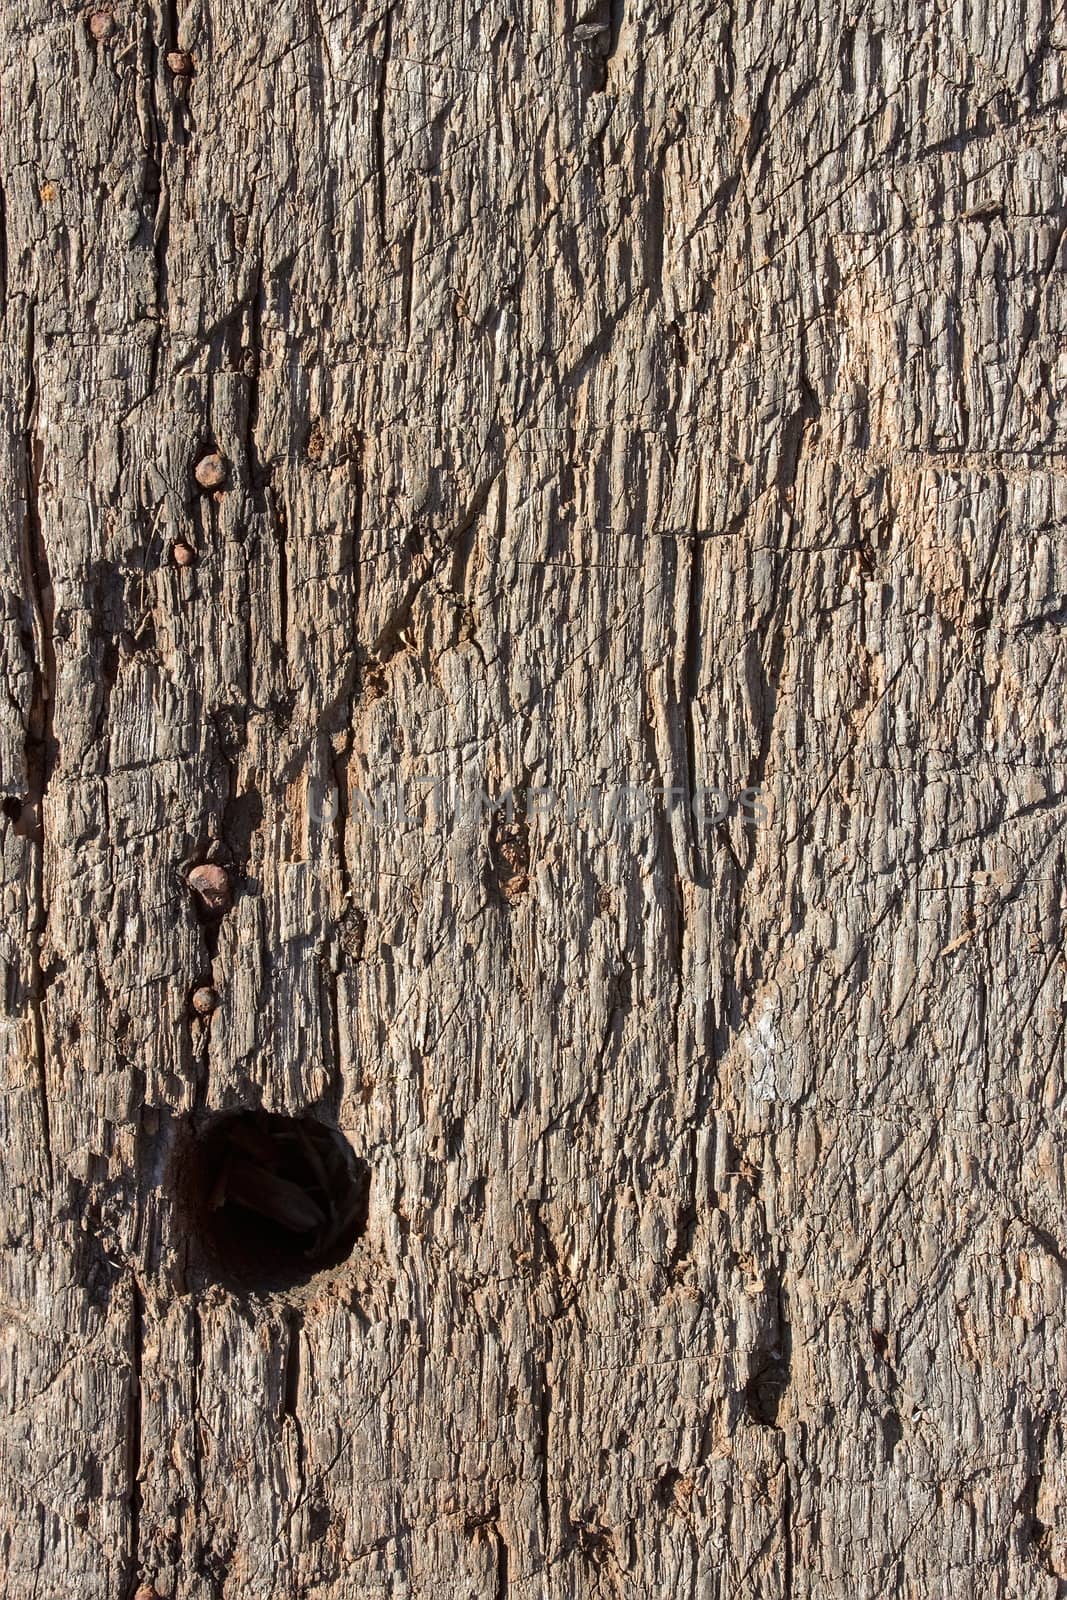 Fragment of very old wooden board with a hole for attaching